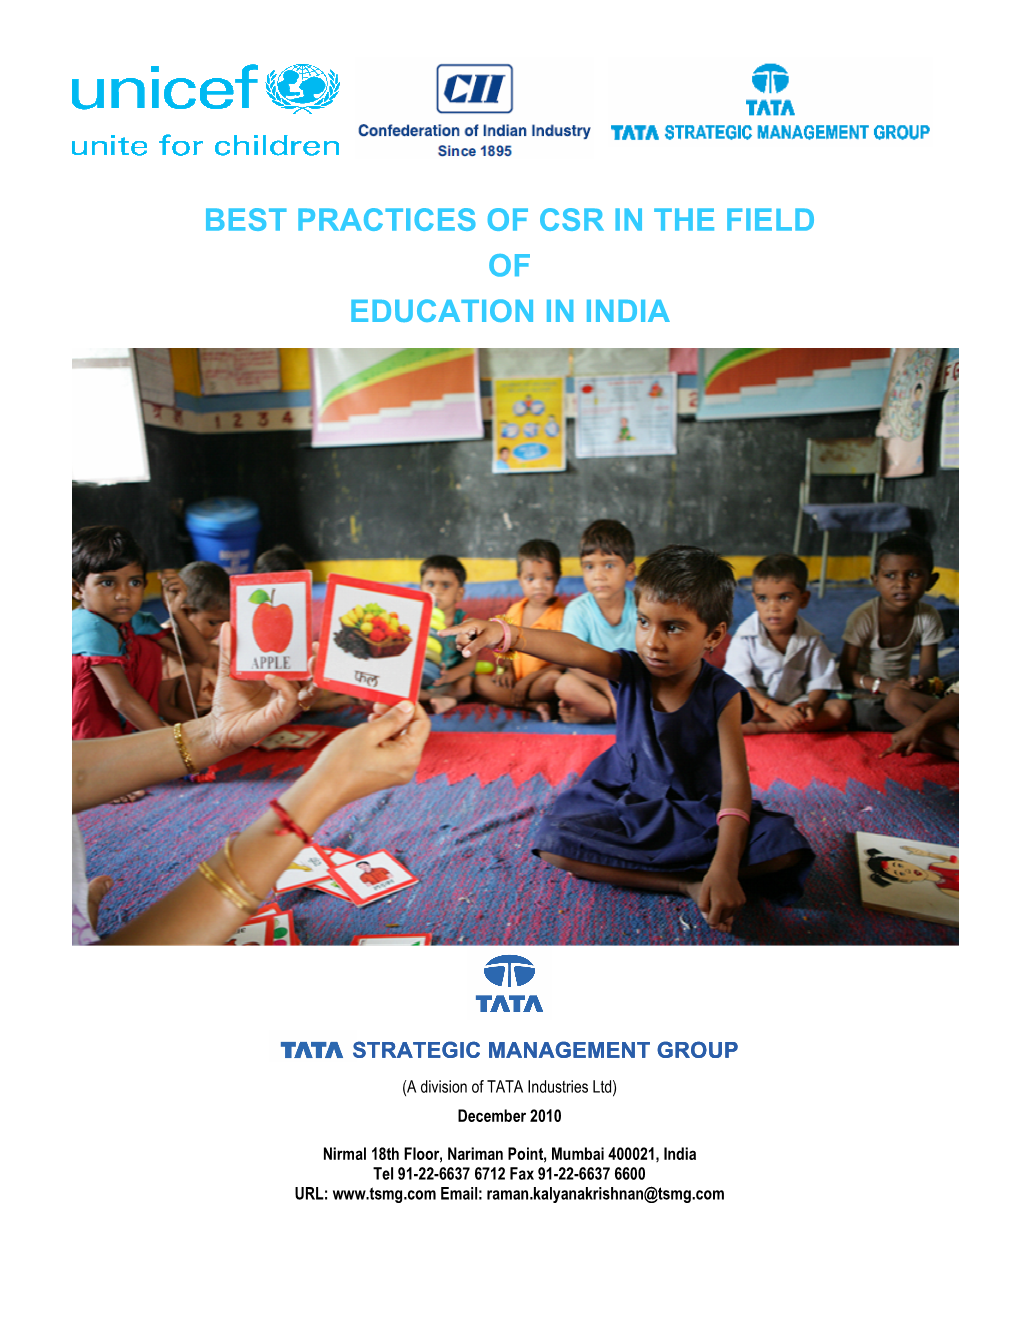 Best Practices of Csr in the Field of Education in India